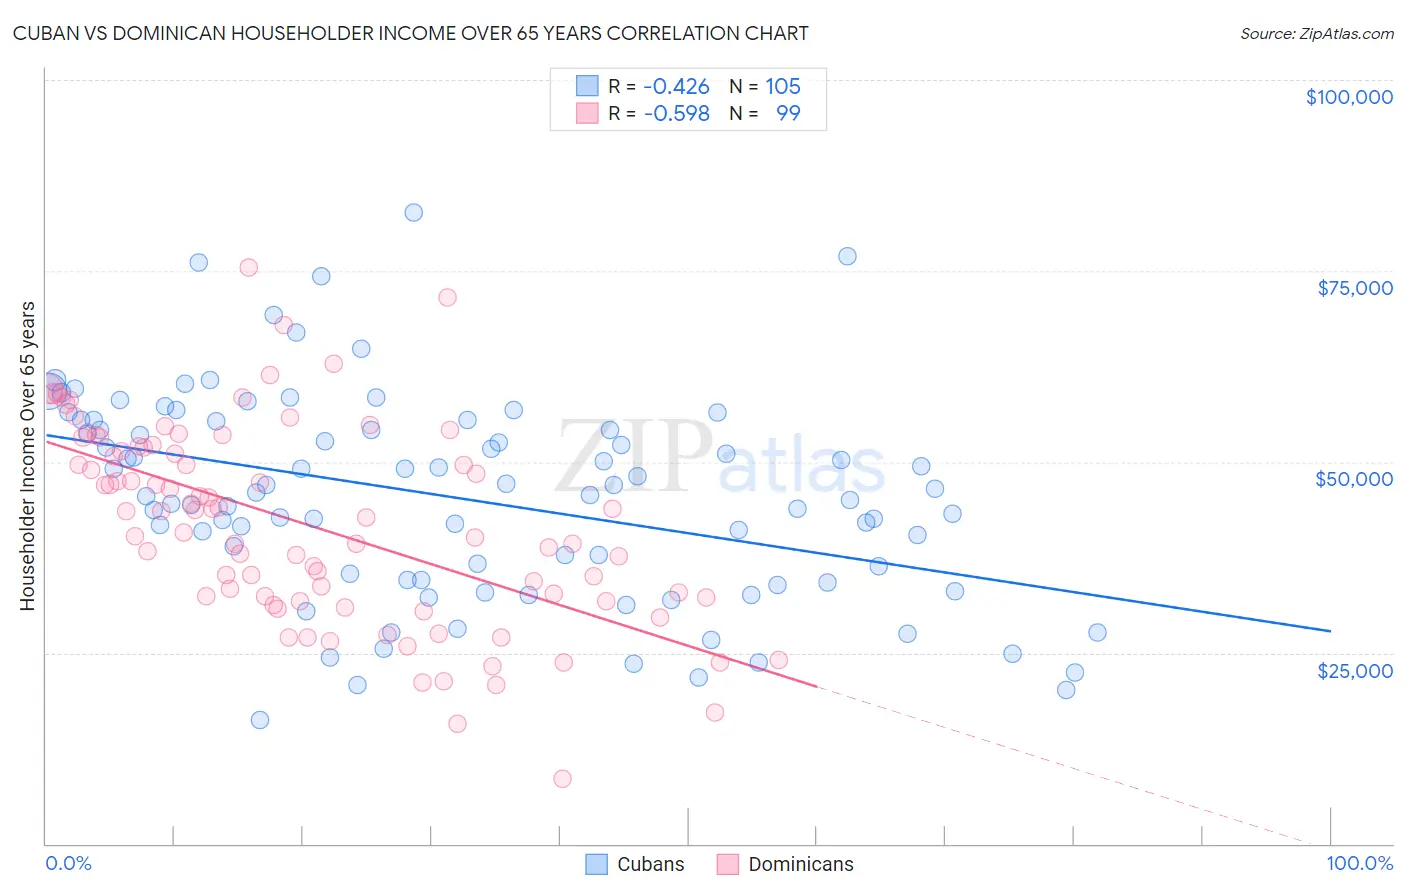 Cuban vs Dominican Householder Income Over 65 years